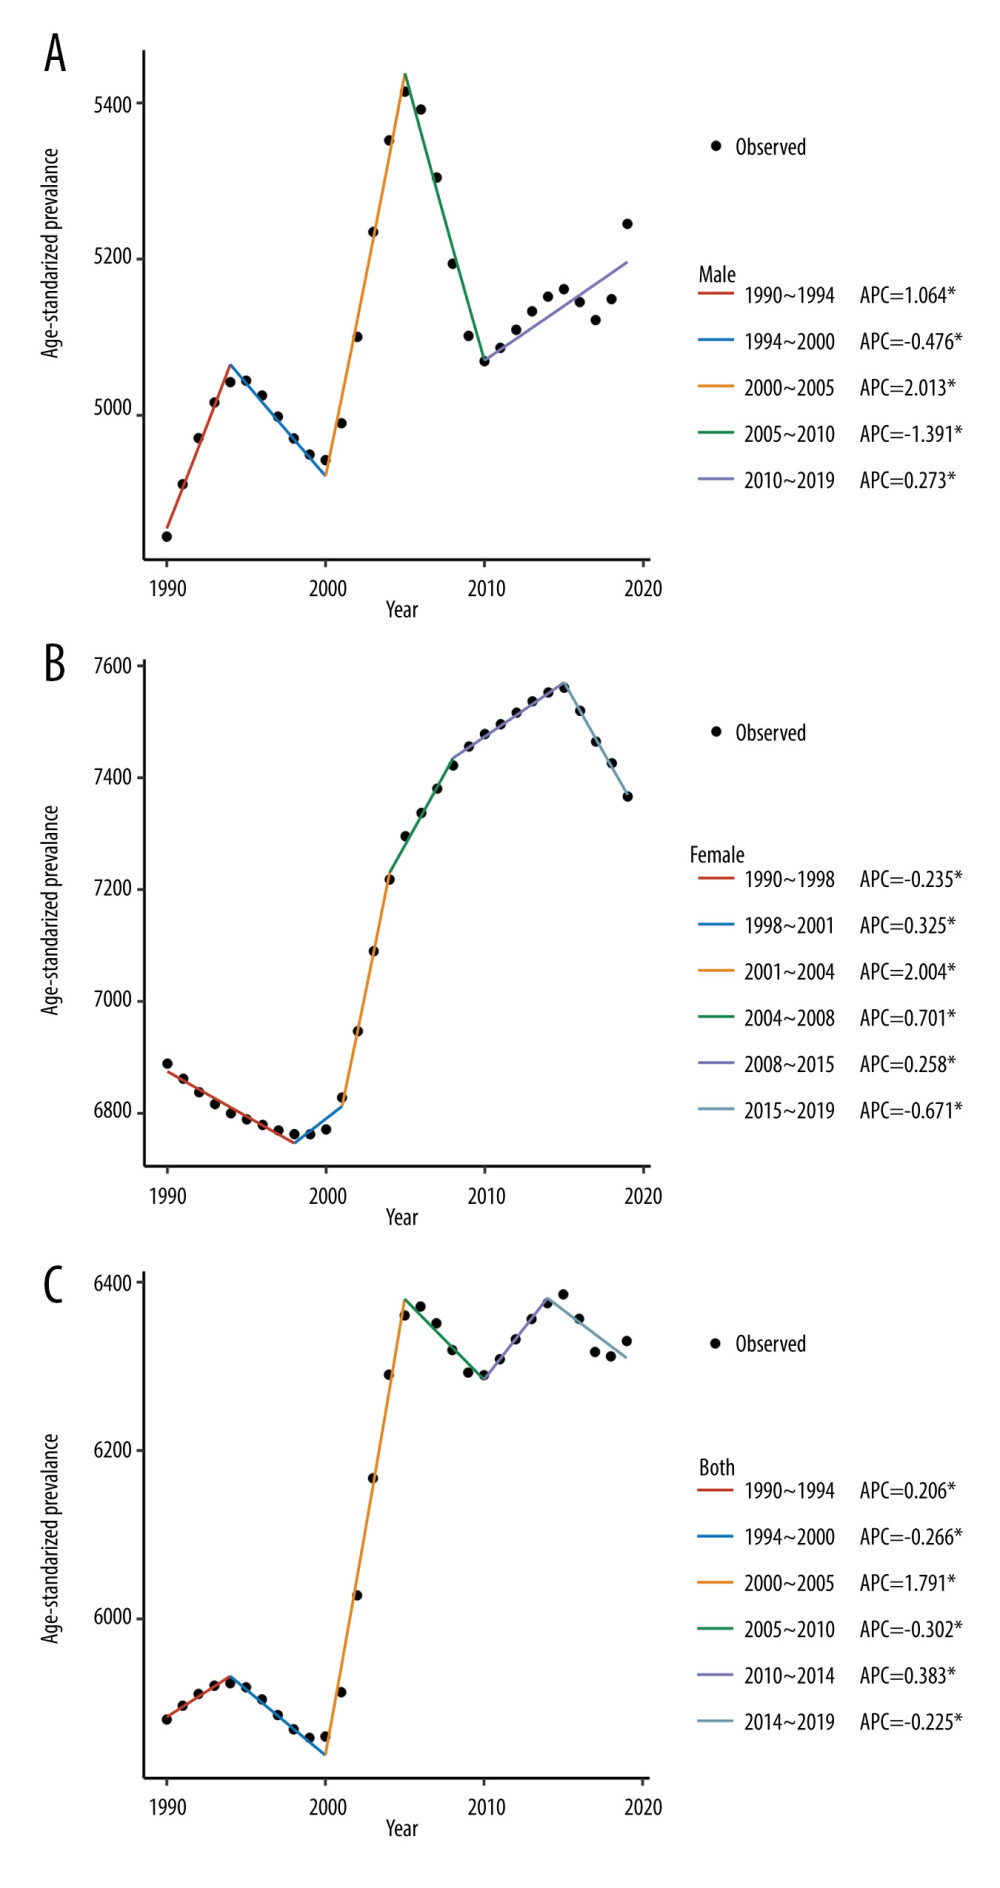 Temporal trend of age-standardized prevalence of osteoarthritis in China from 1990 to 2019 for men (A), women (B), and both sexes (C). * Indicates that the annual percent change (APC) is significantly different from zero. (Created by R software, version 4.2.1, R Foundation for Statistical Computing).